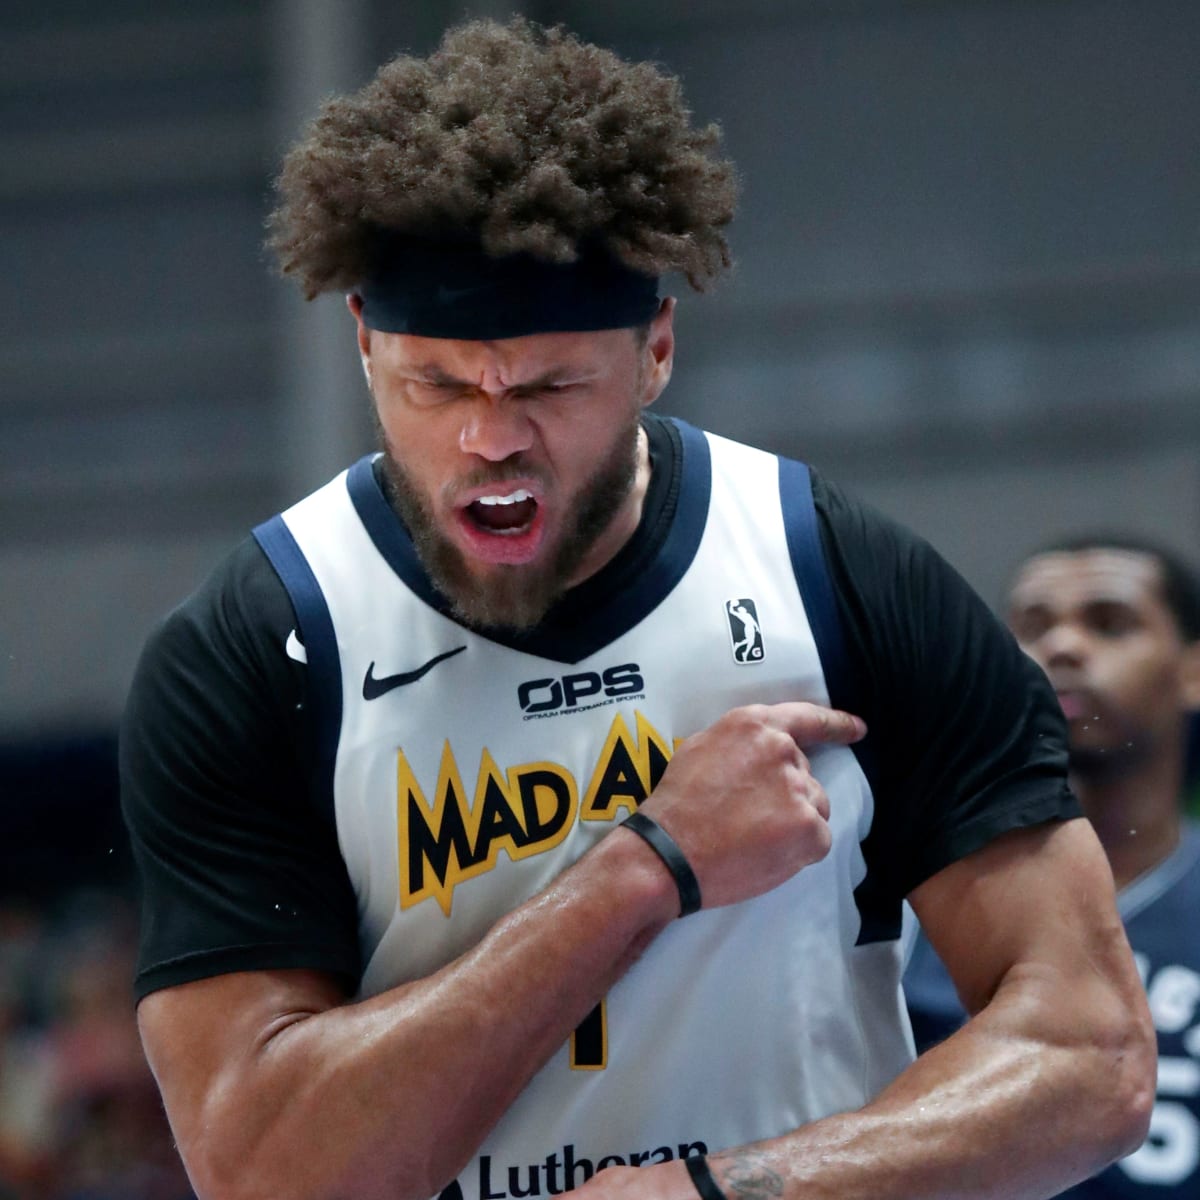 2022-23 Mad Ants full game schedule announced - Fort Wayne Mad Ants